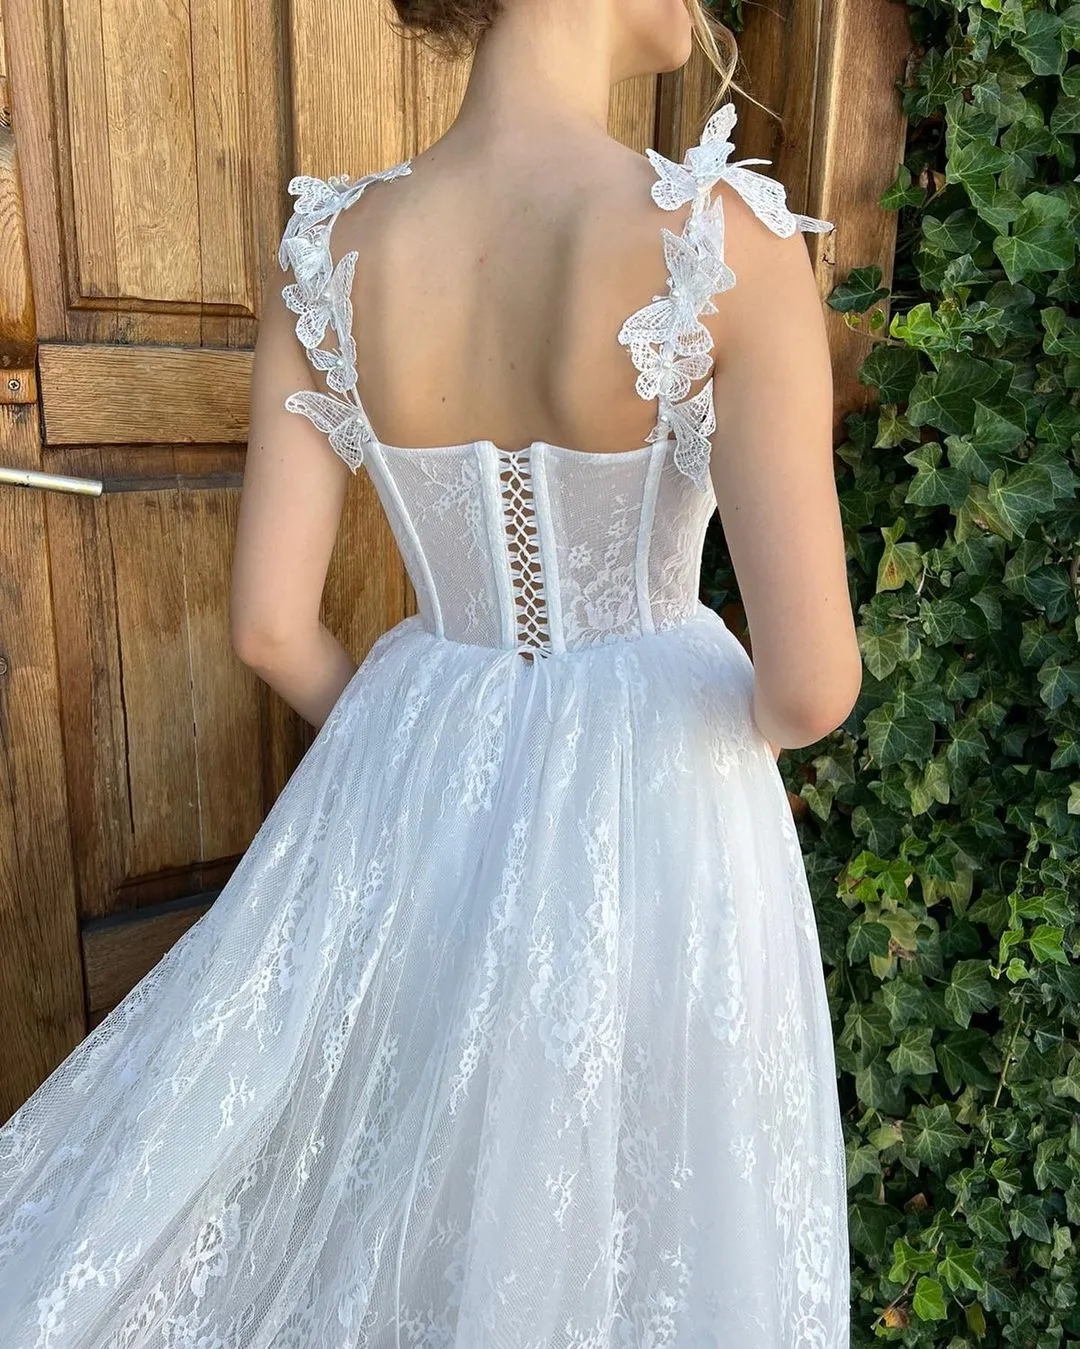 Elegant White Homecoming Dresses Spaghetti Sweetheart Lace Prom Party Gown Tea Length Homecoming Dress A Line